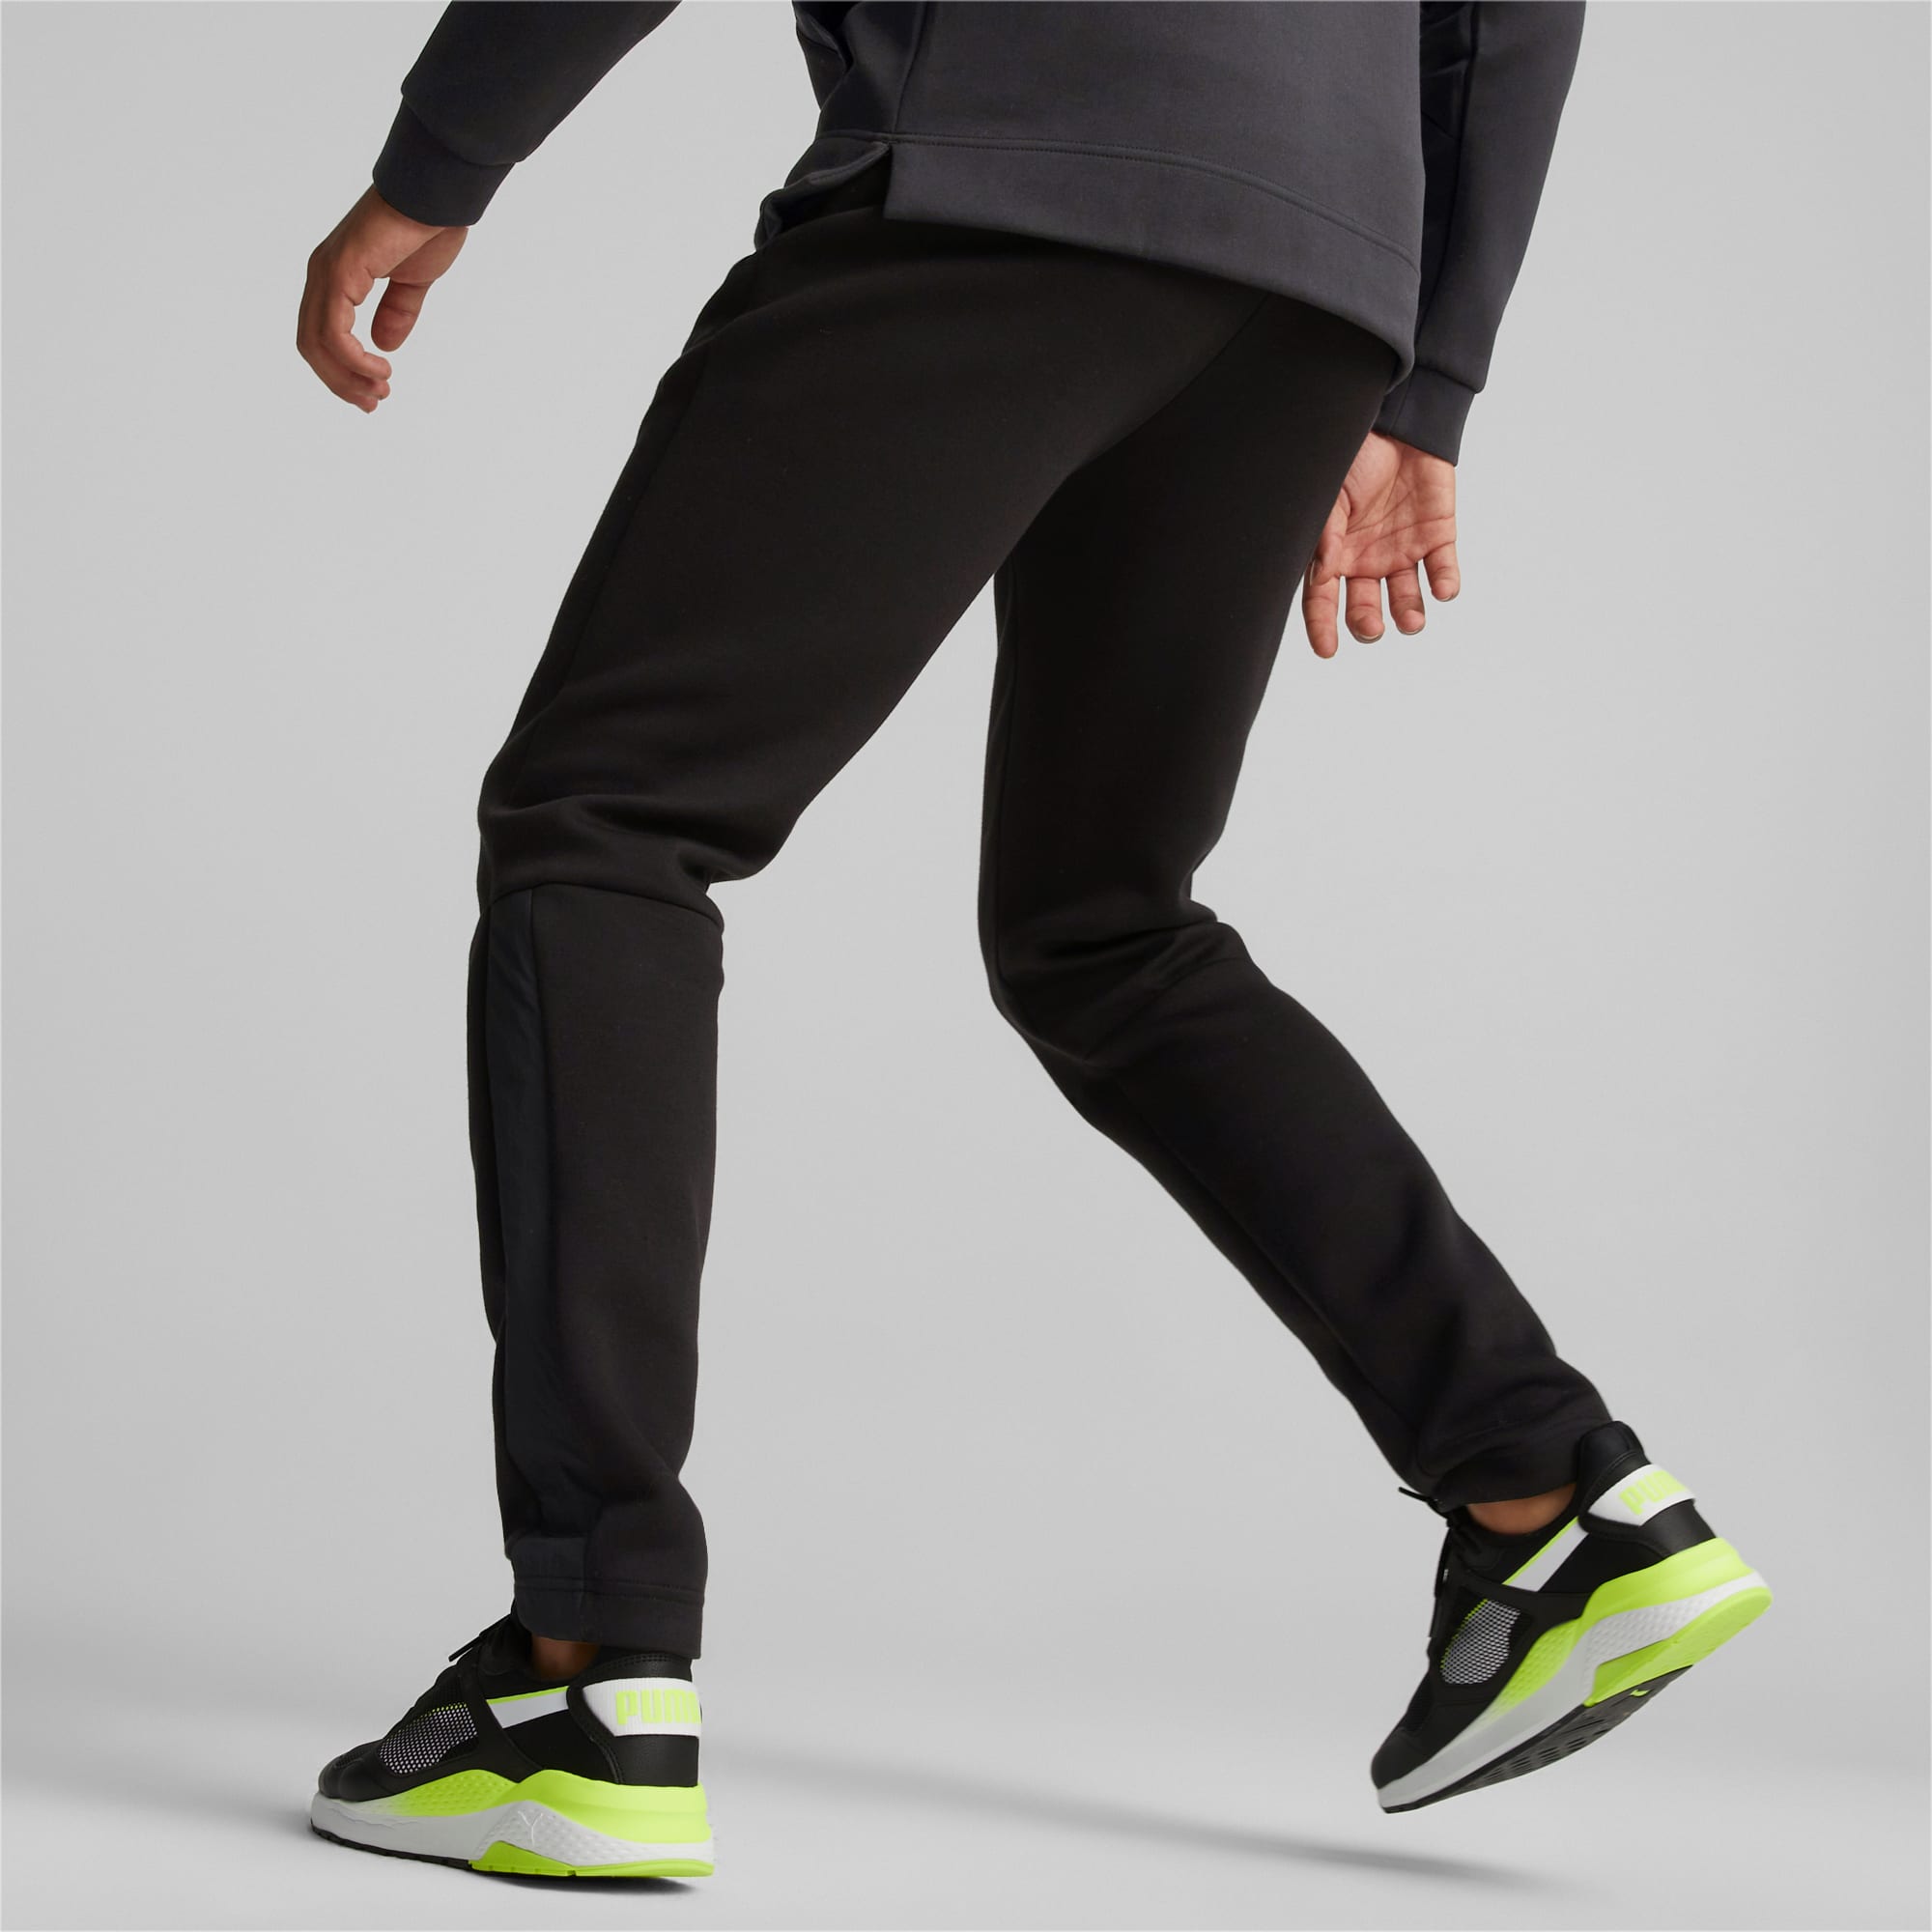 Day in Motion Men's Pants | PUMA